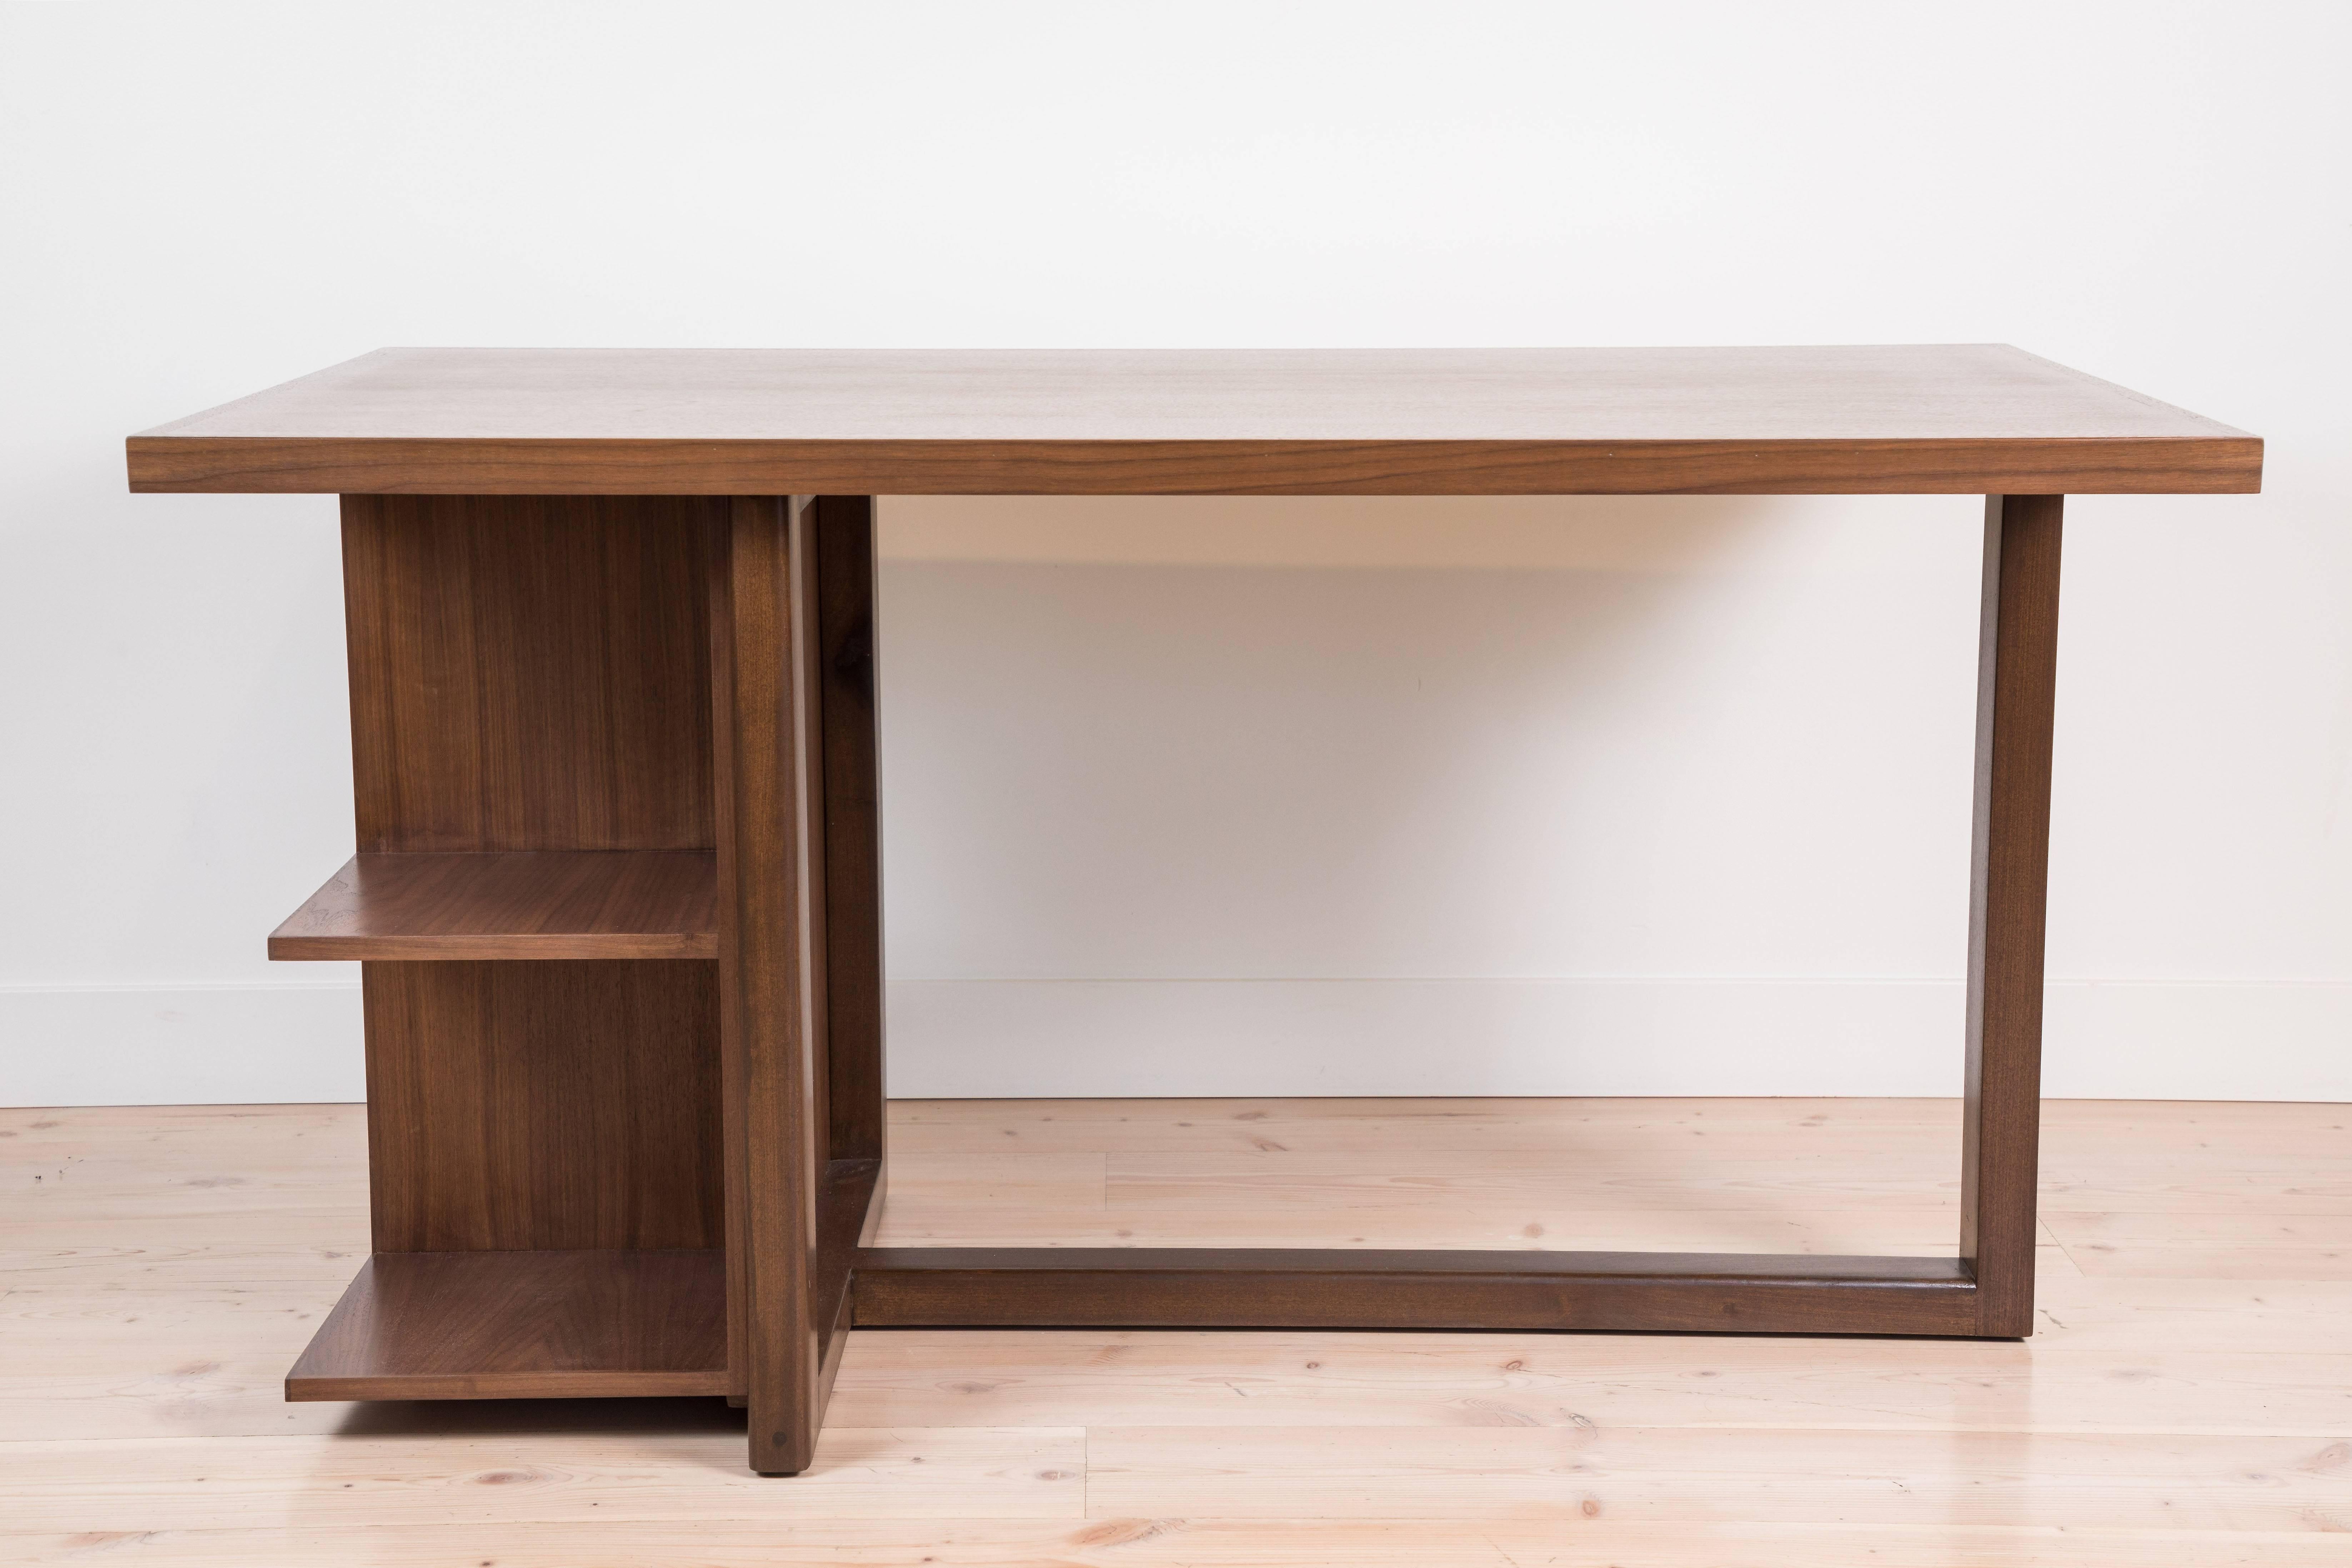 The Ivanhoe desk features a cantilevered base with open display shelves. Available in American walnut or white oak and drawers are available upon request.

Available to order in various finishes with a 10-12 week lead time.